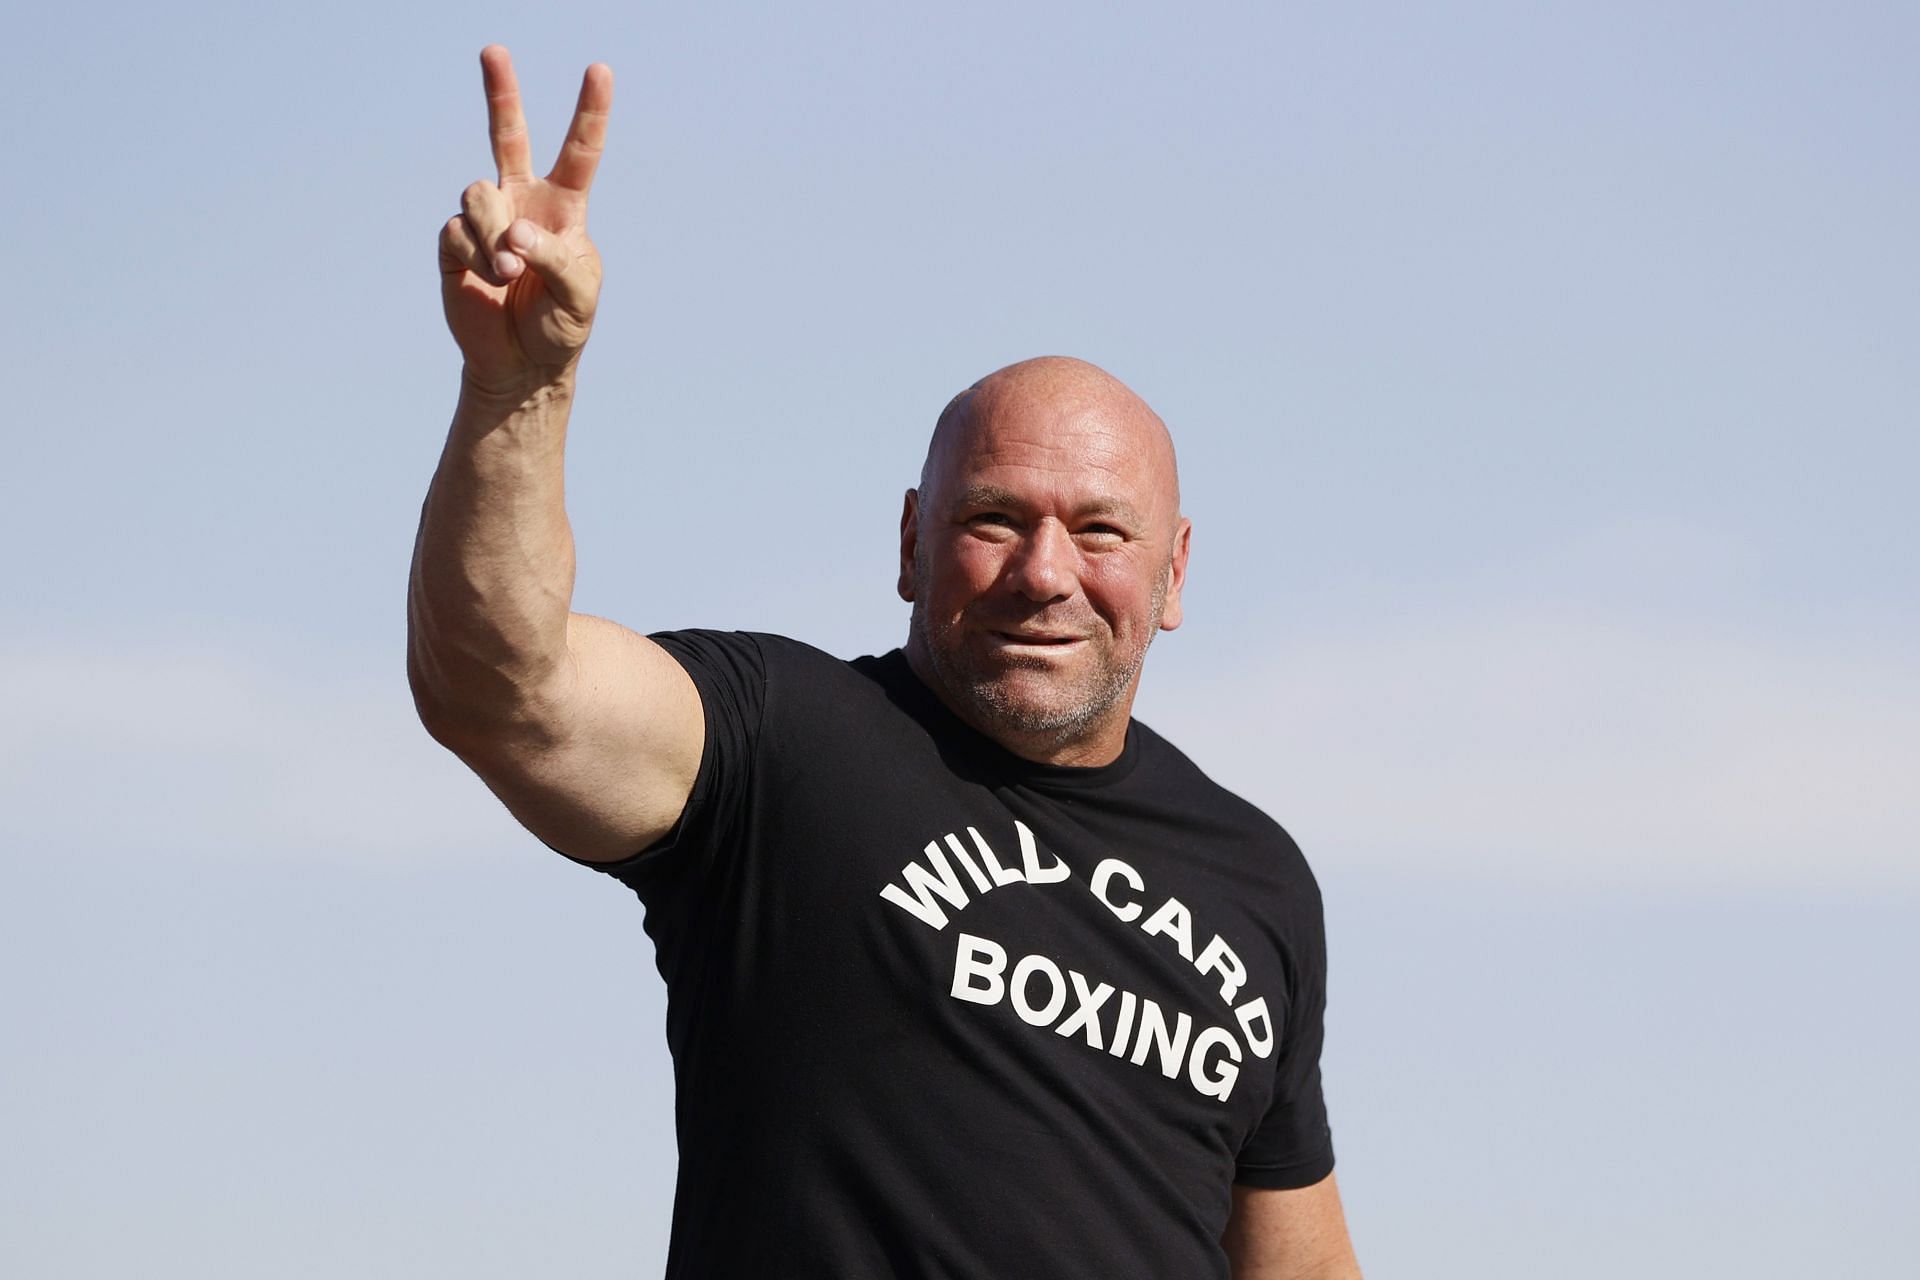 Dana White talks about getting involved with boxing